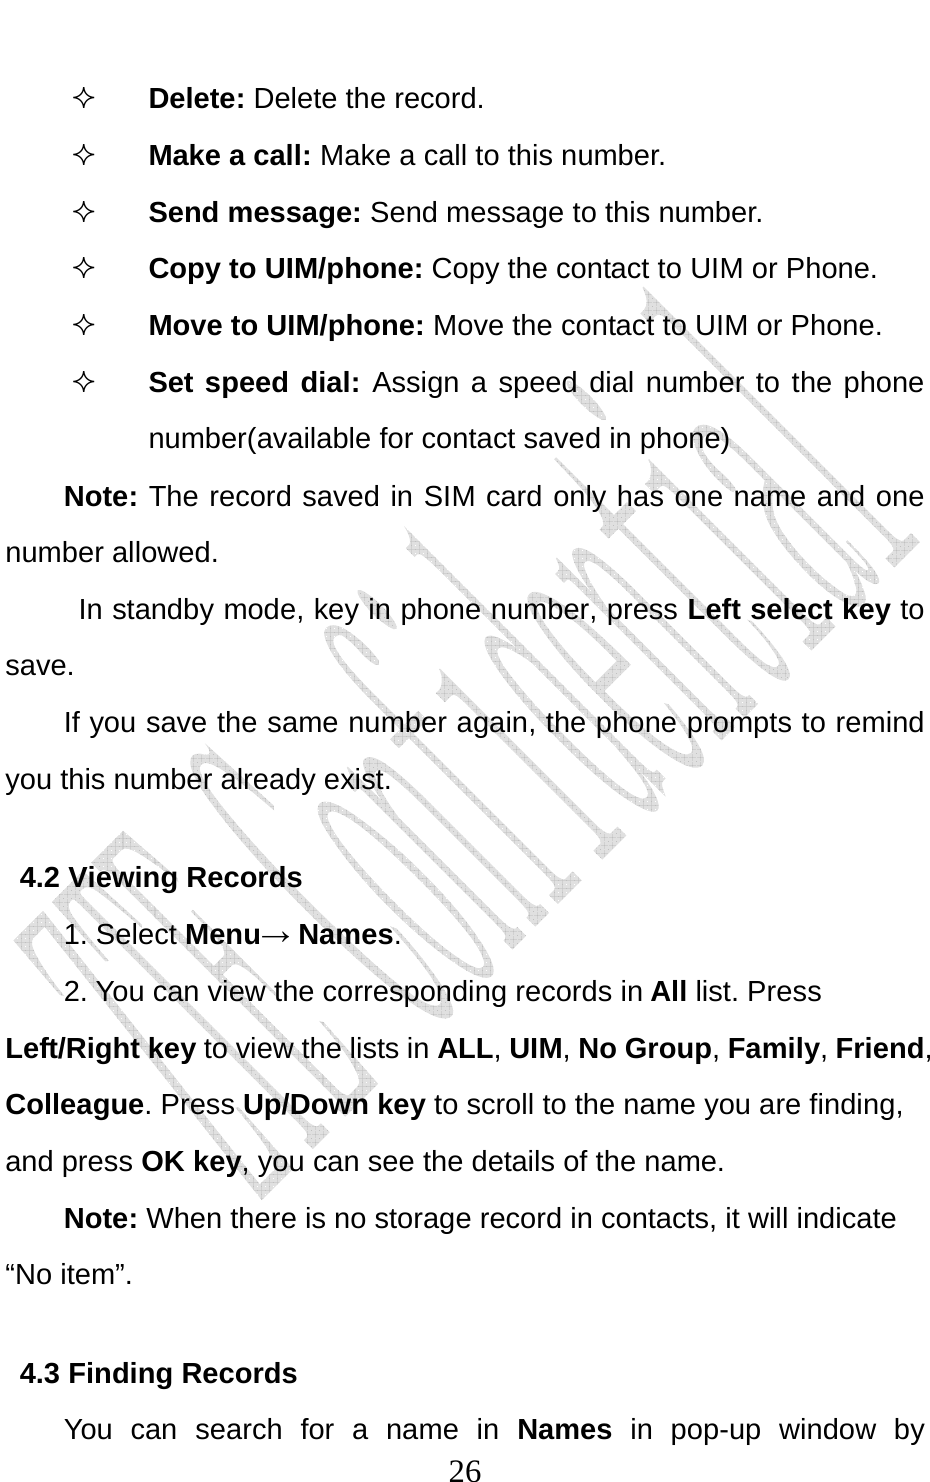                              26 Delete: Delete the record.  Make a call: Make a call to this number.  Send message: Send message to this number.  Copy to UIM/phone: Copy the contact to UIM or Phone.    Move to UIM/phone: Move the contact to UIM or Phone.  Set speed dial: Assign a speed dial number to the phone number(available for contact saved in phone) Note: The record saved in SIM card only has one name and one number allowed.  In standby mode, key in phone number, press Left select key to save. If you save the same number again, the phone prompts to remind you this number already exist. 4.2 Viewing Records 1. Select Menu→ Names.  2. You can view the corresponding records in All list. Press Left/Right key to view the lists in ALL, UIM, No Group, Family, Friend, Colleague. Press Up/Down key to scroll to the name you are finding, and press OK key, you can see the details of the name. Note: When there is no storage record in contacts, it will indicate “No item”. 4.3 Finding Records You can search for a name in Names in pop-up window by 